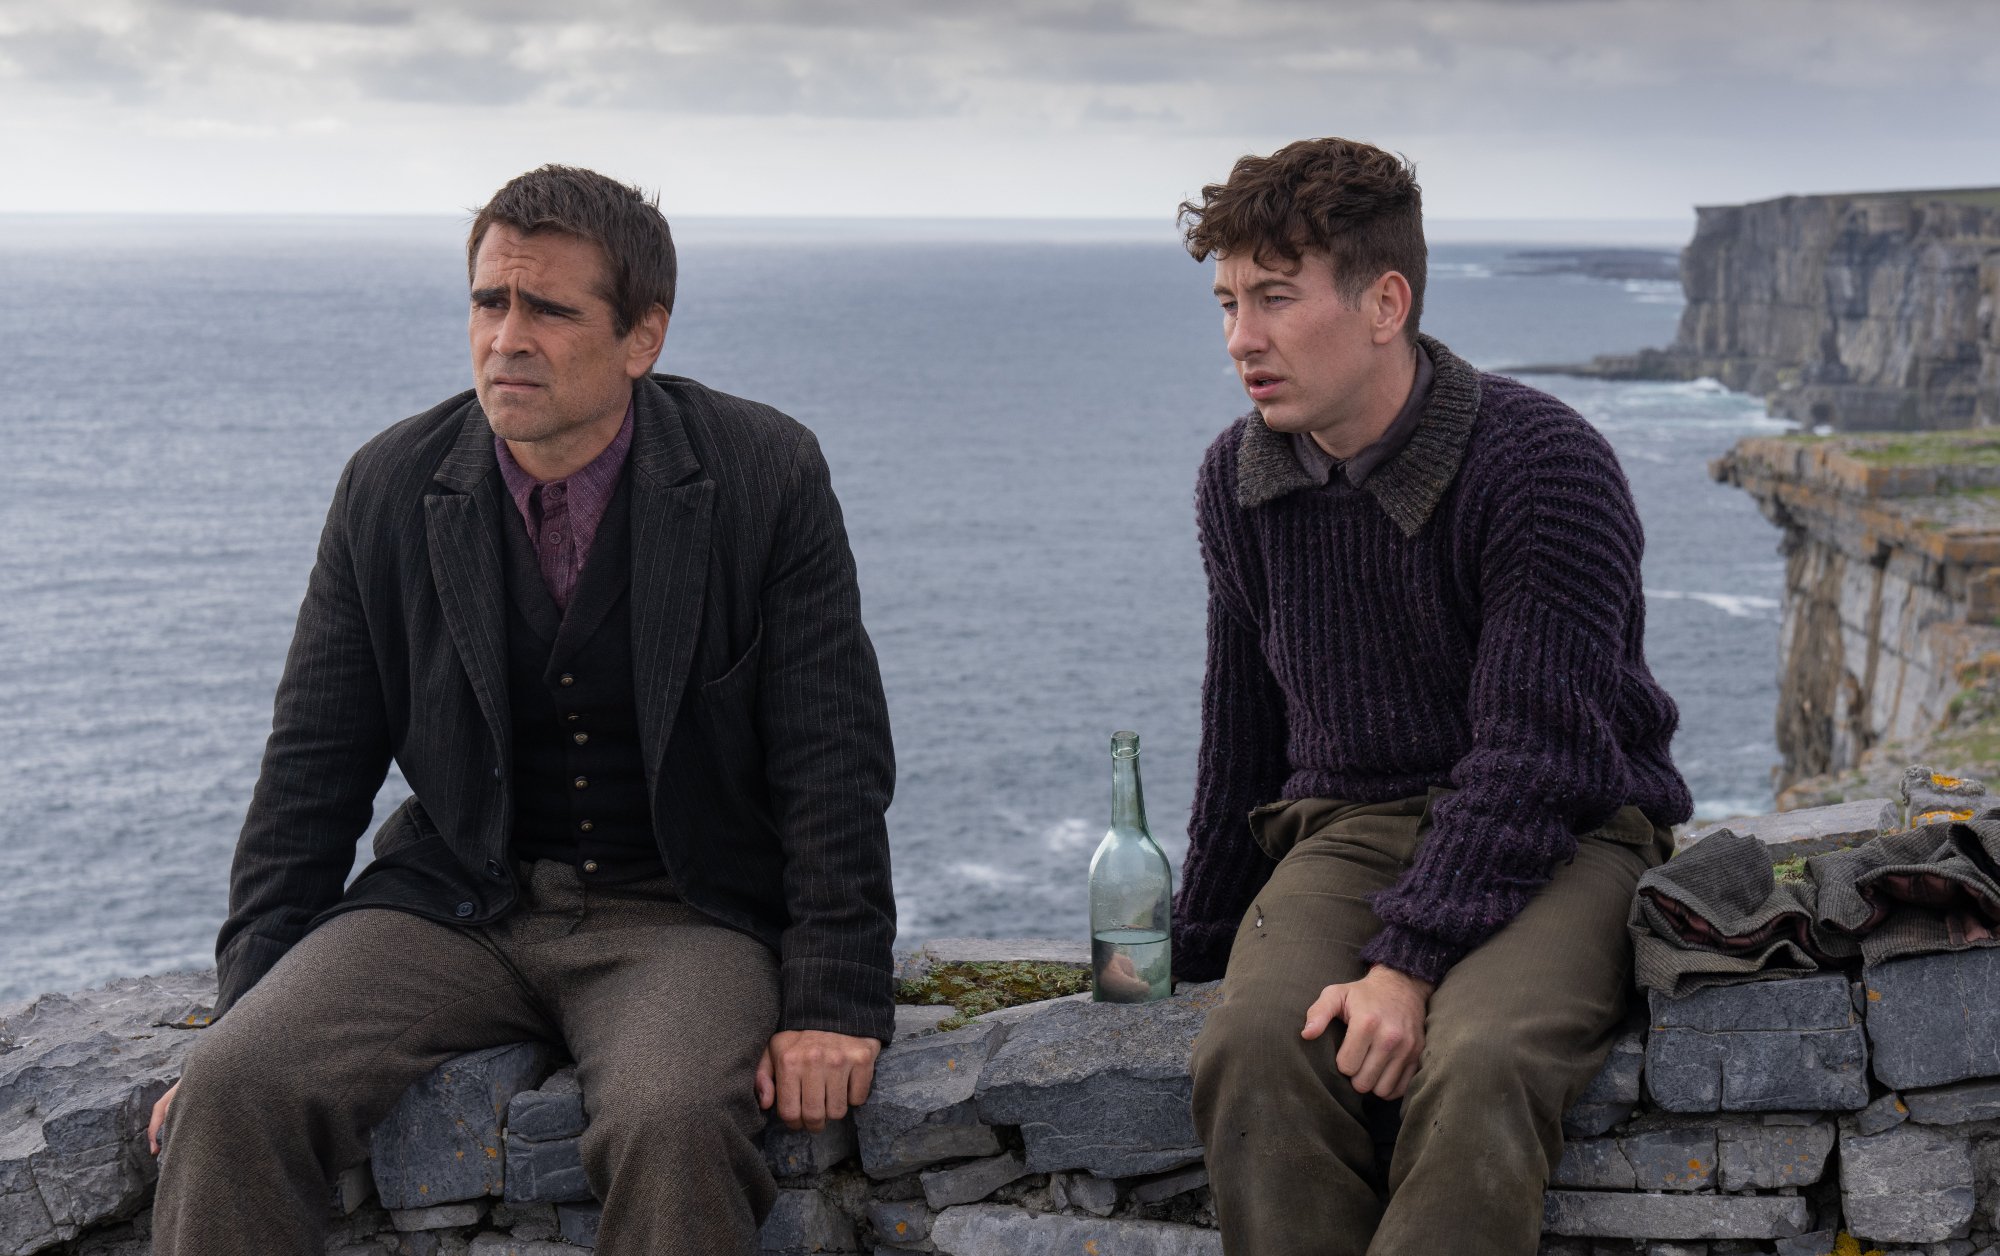 'The Banshees of Inisherin' Colin Farrell as Pádraic and Barry Keoghan as Dominic Kearney sitting on a stone wall with the ocean in the background